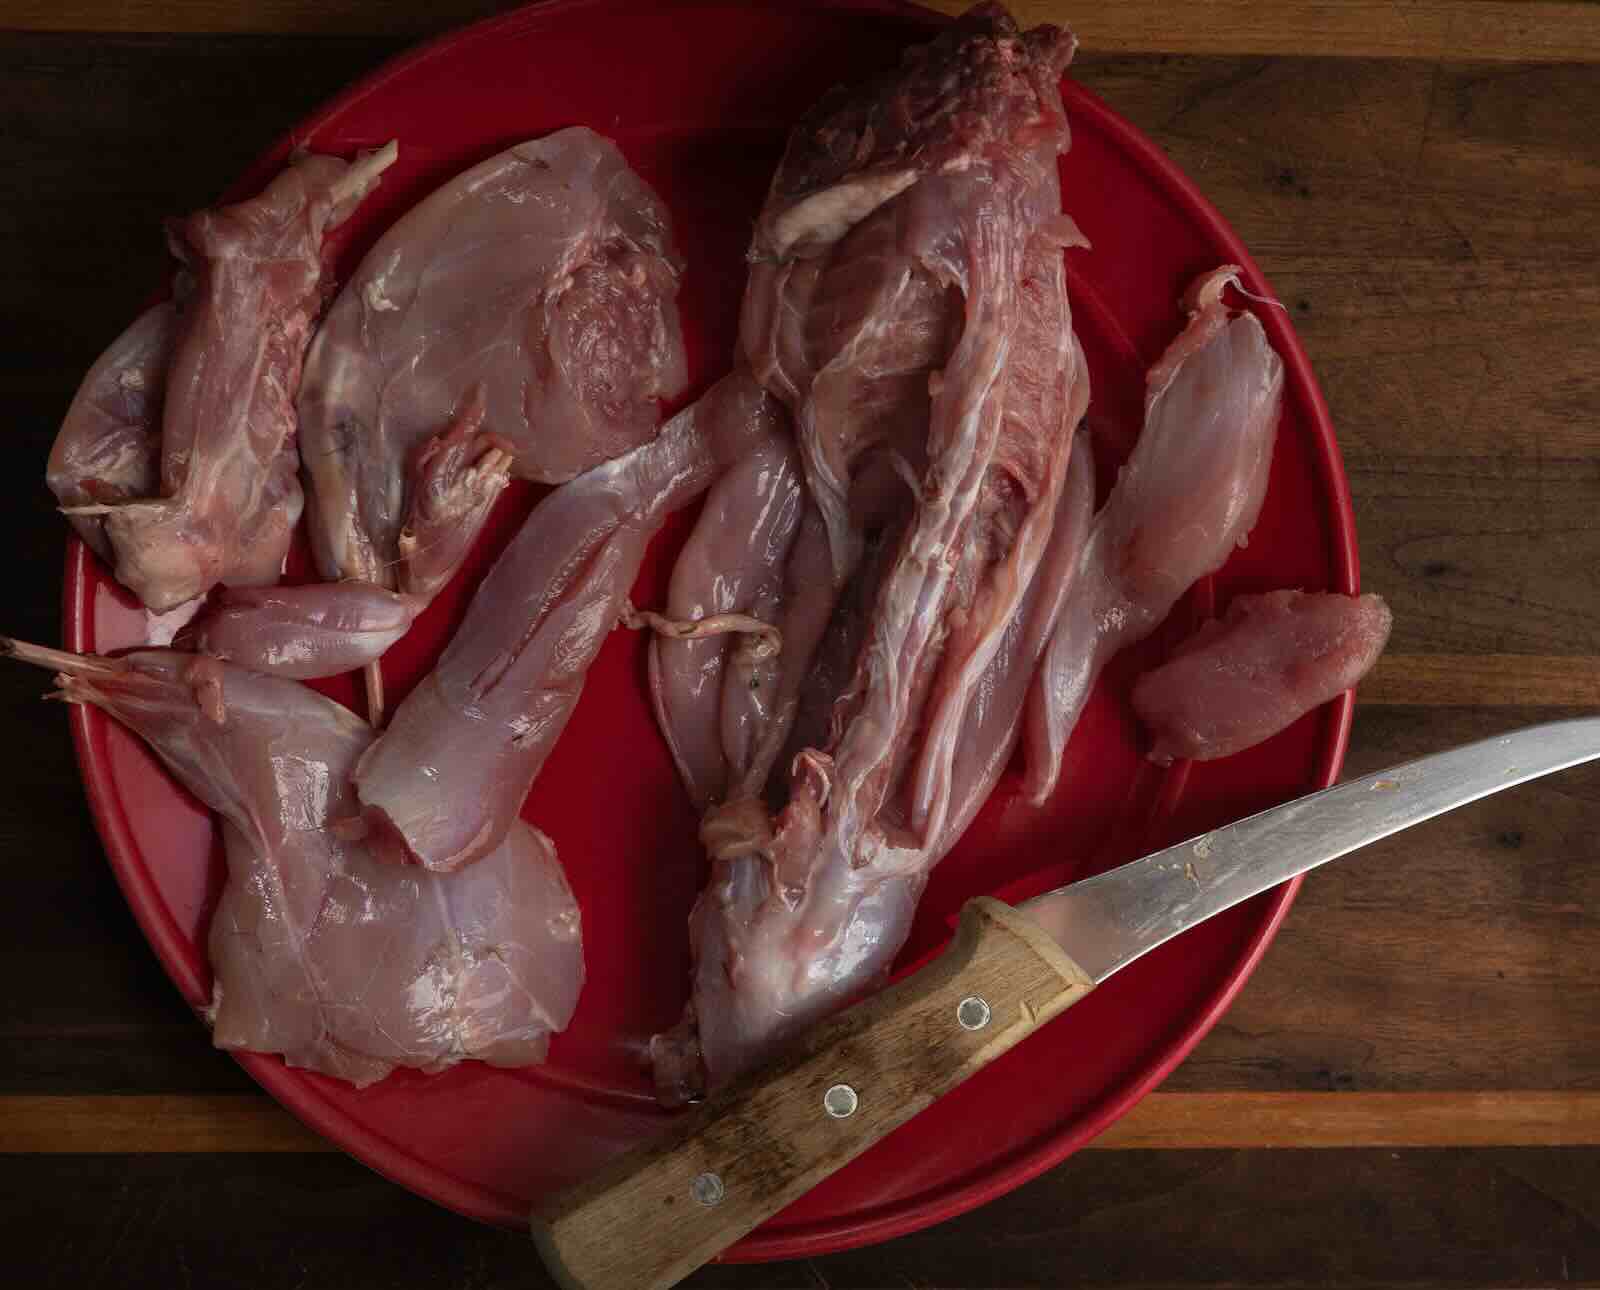 Fresh, raw rabbit meat separated and displayed on a red plate with a carving knife